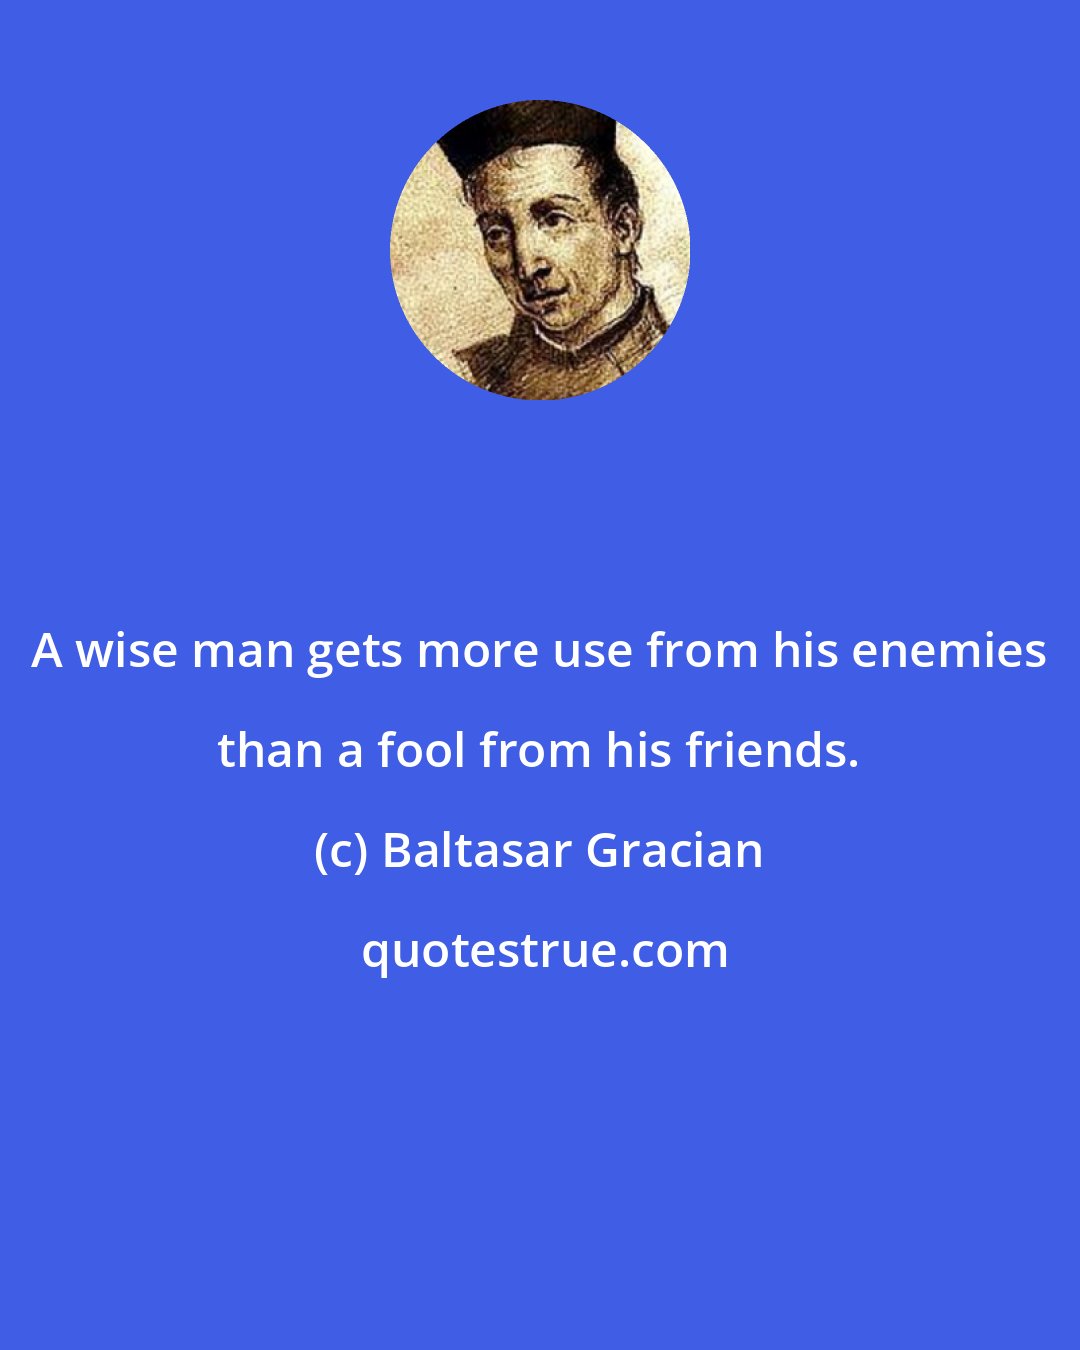 Baltasar Gracian: A wise man gets more use from his enemies than a fool from his friends.